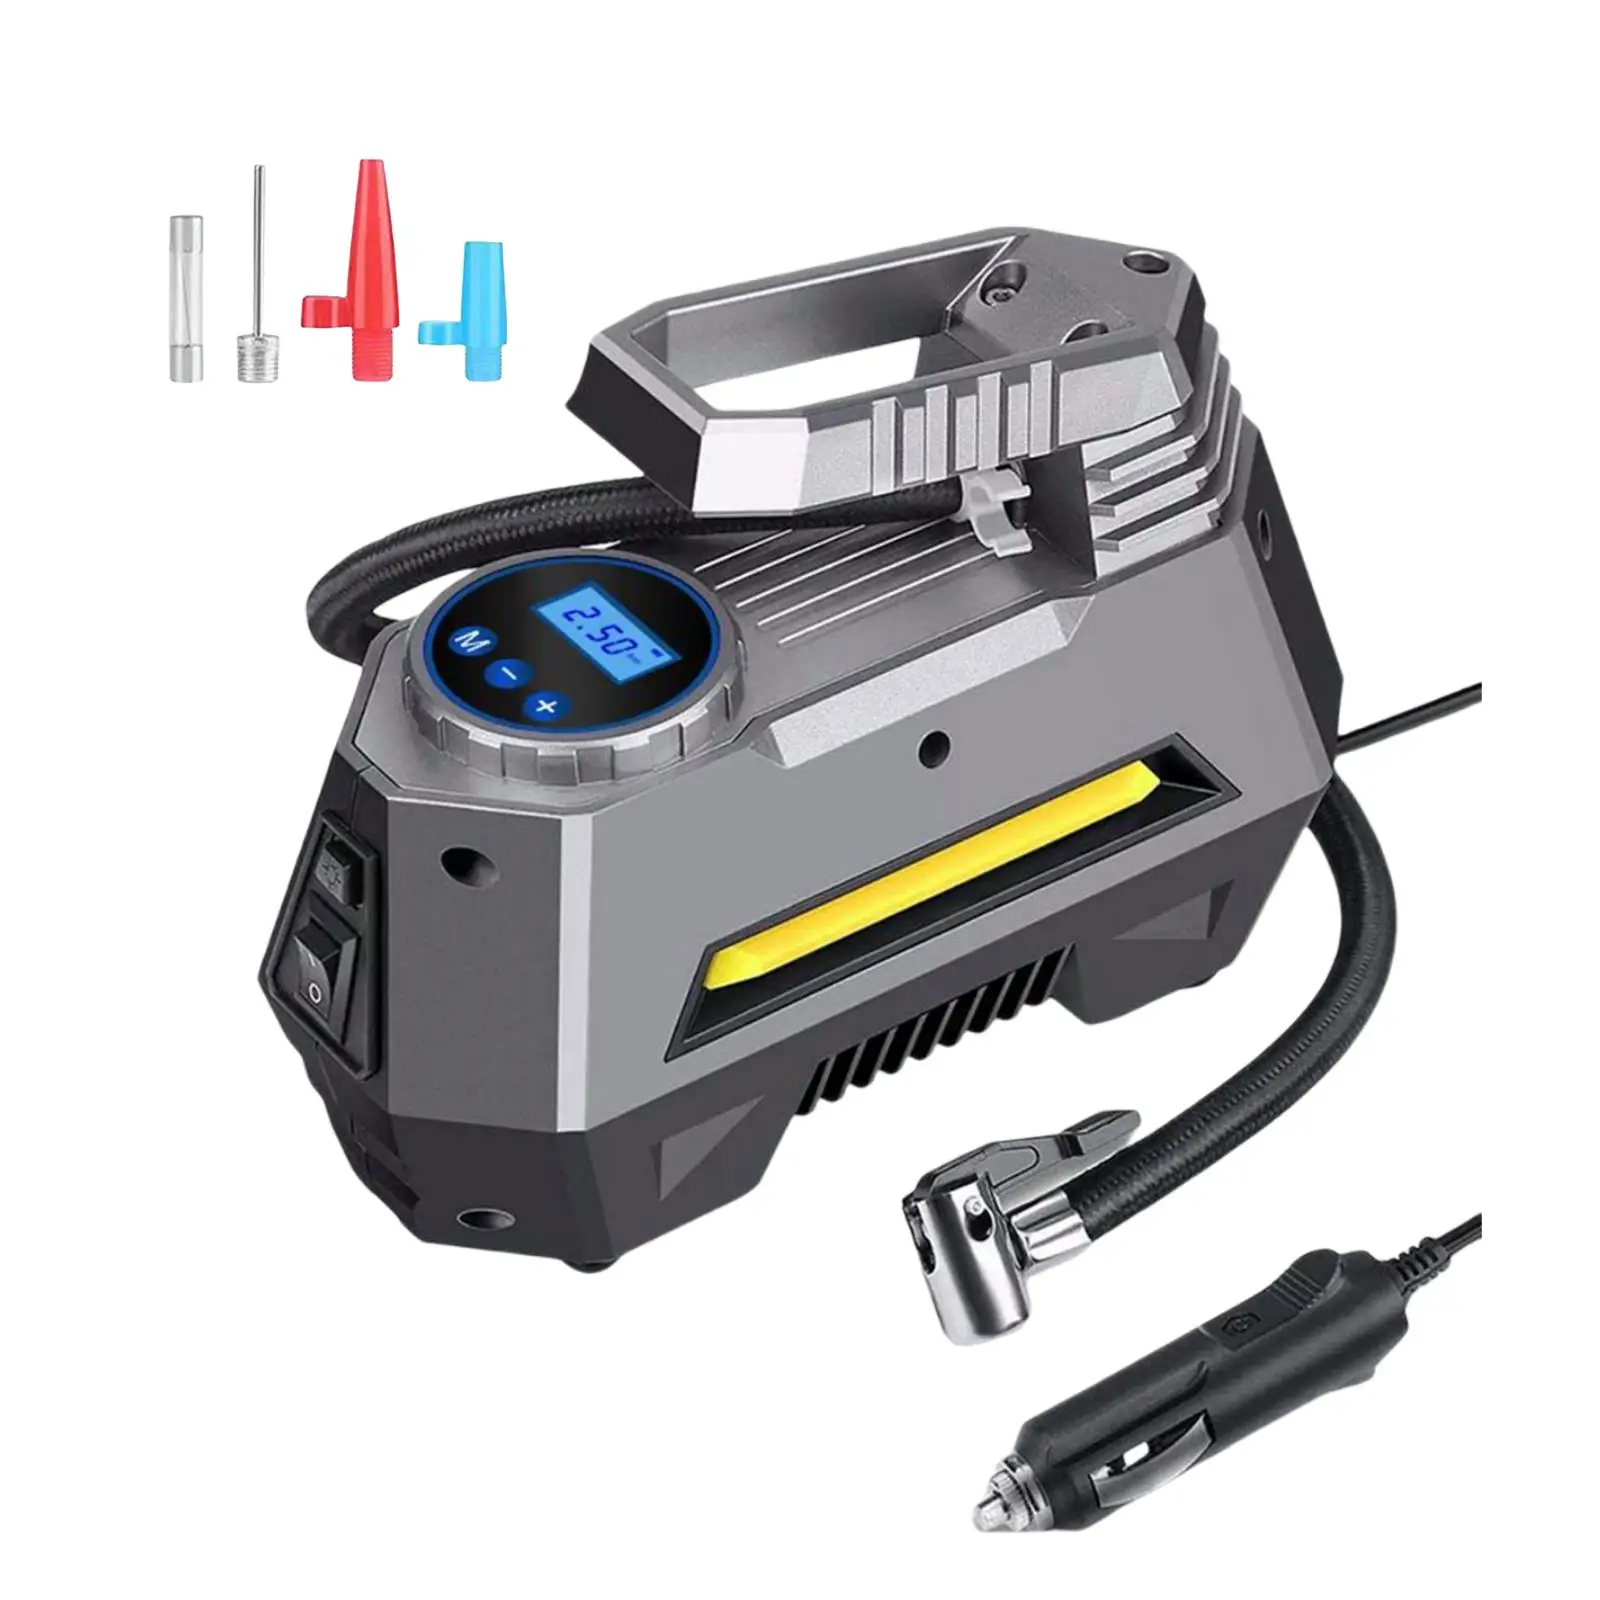 150PSI Air Compressor Tire Inflator with LED Light Vehicle Mounted Inflation Pump Auto Tire Pump for Car Tires Other Inflatables